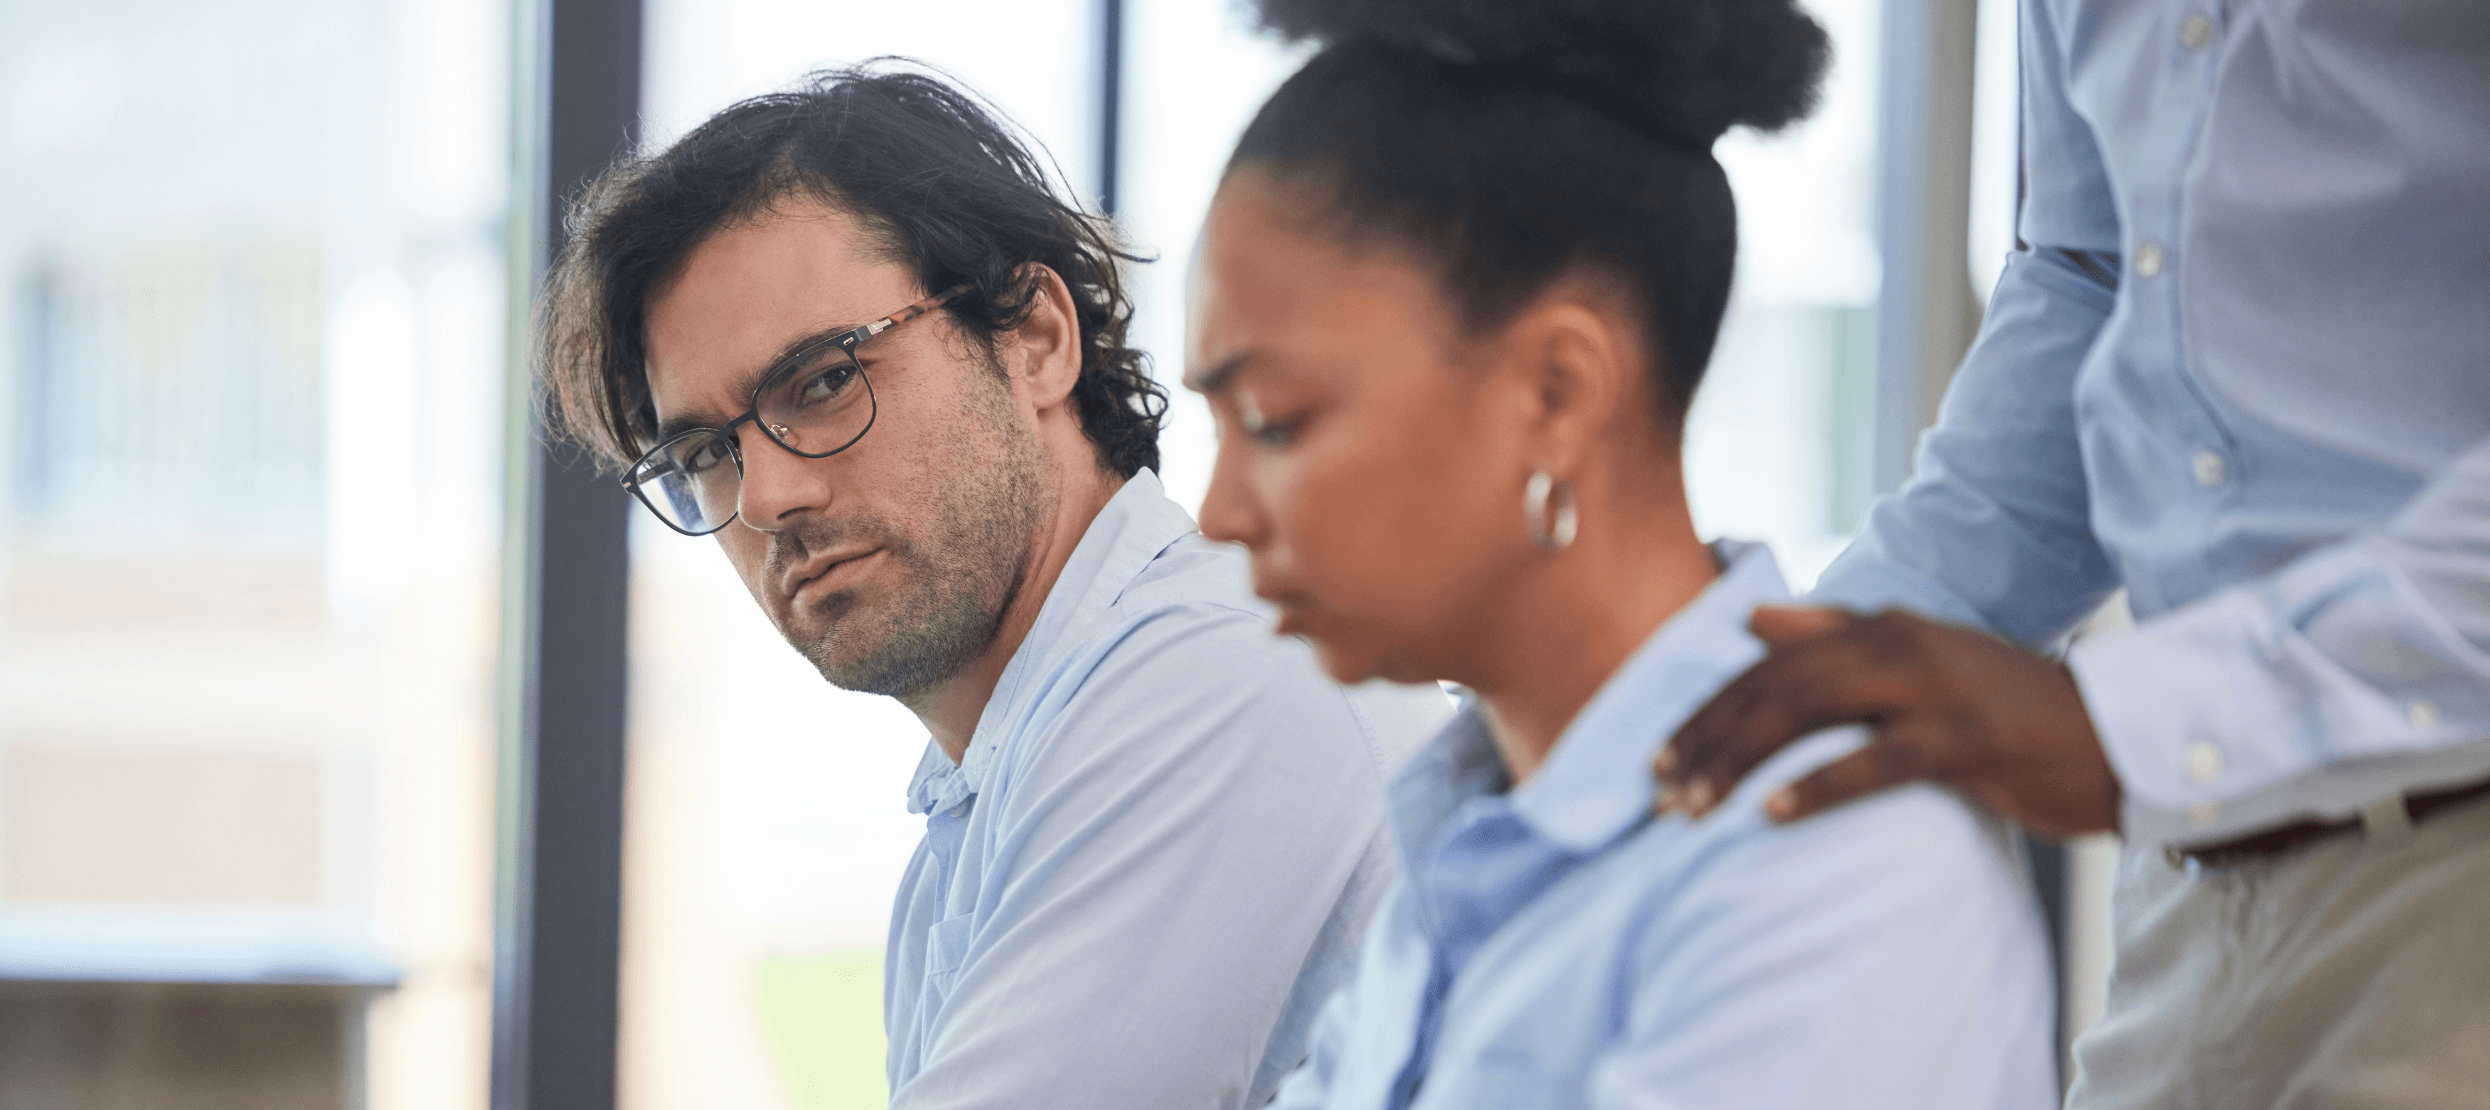 Powerful Bystander Intervention Strategies to Deter Workplace Harassment